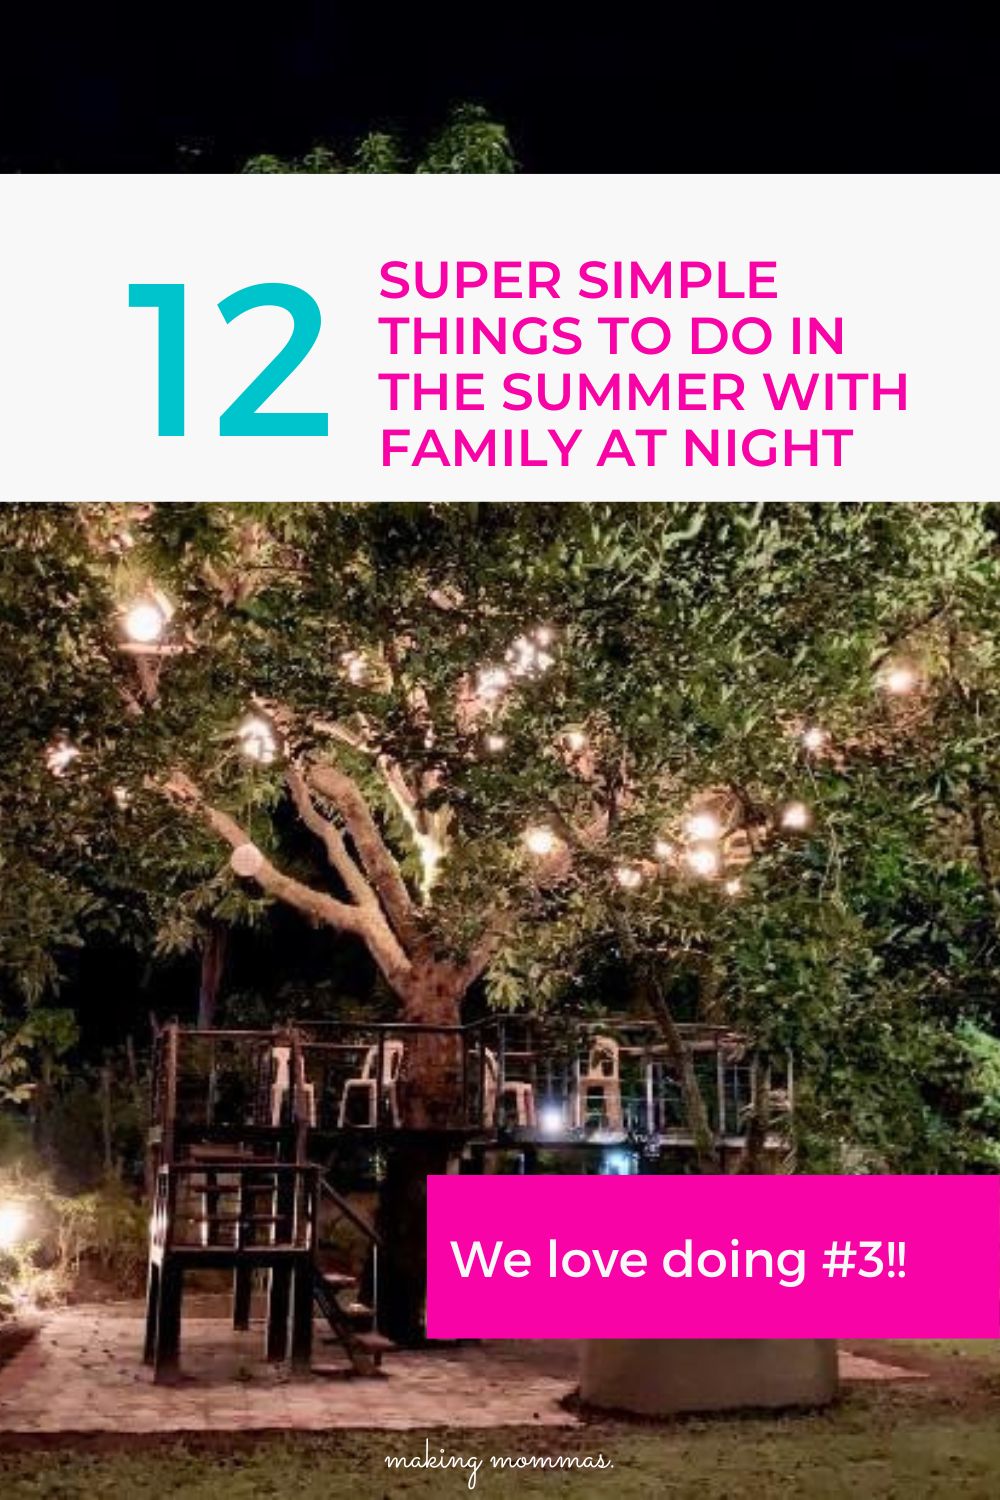 pin of 12 super simple things to do in the summer with family at night